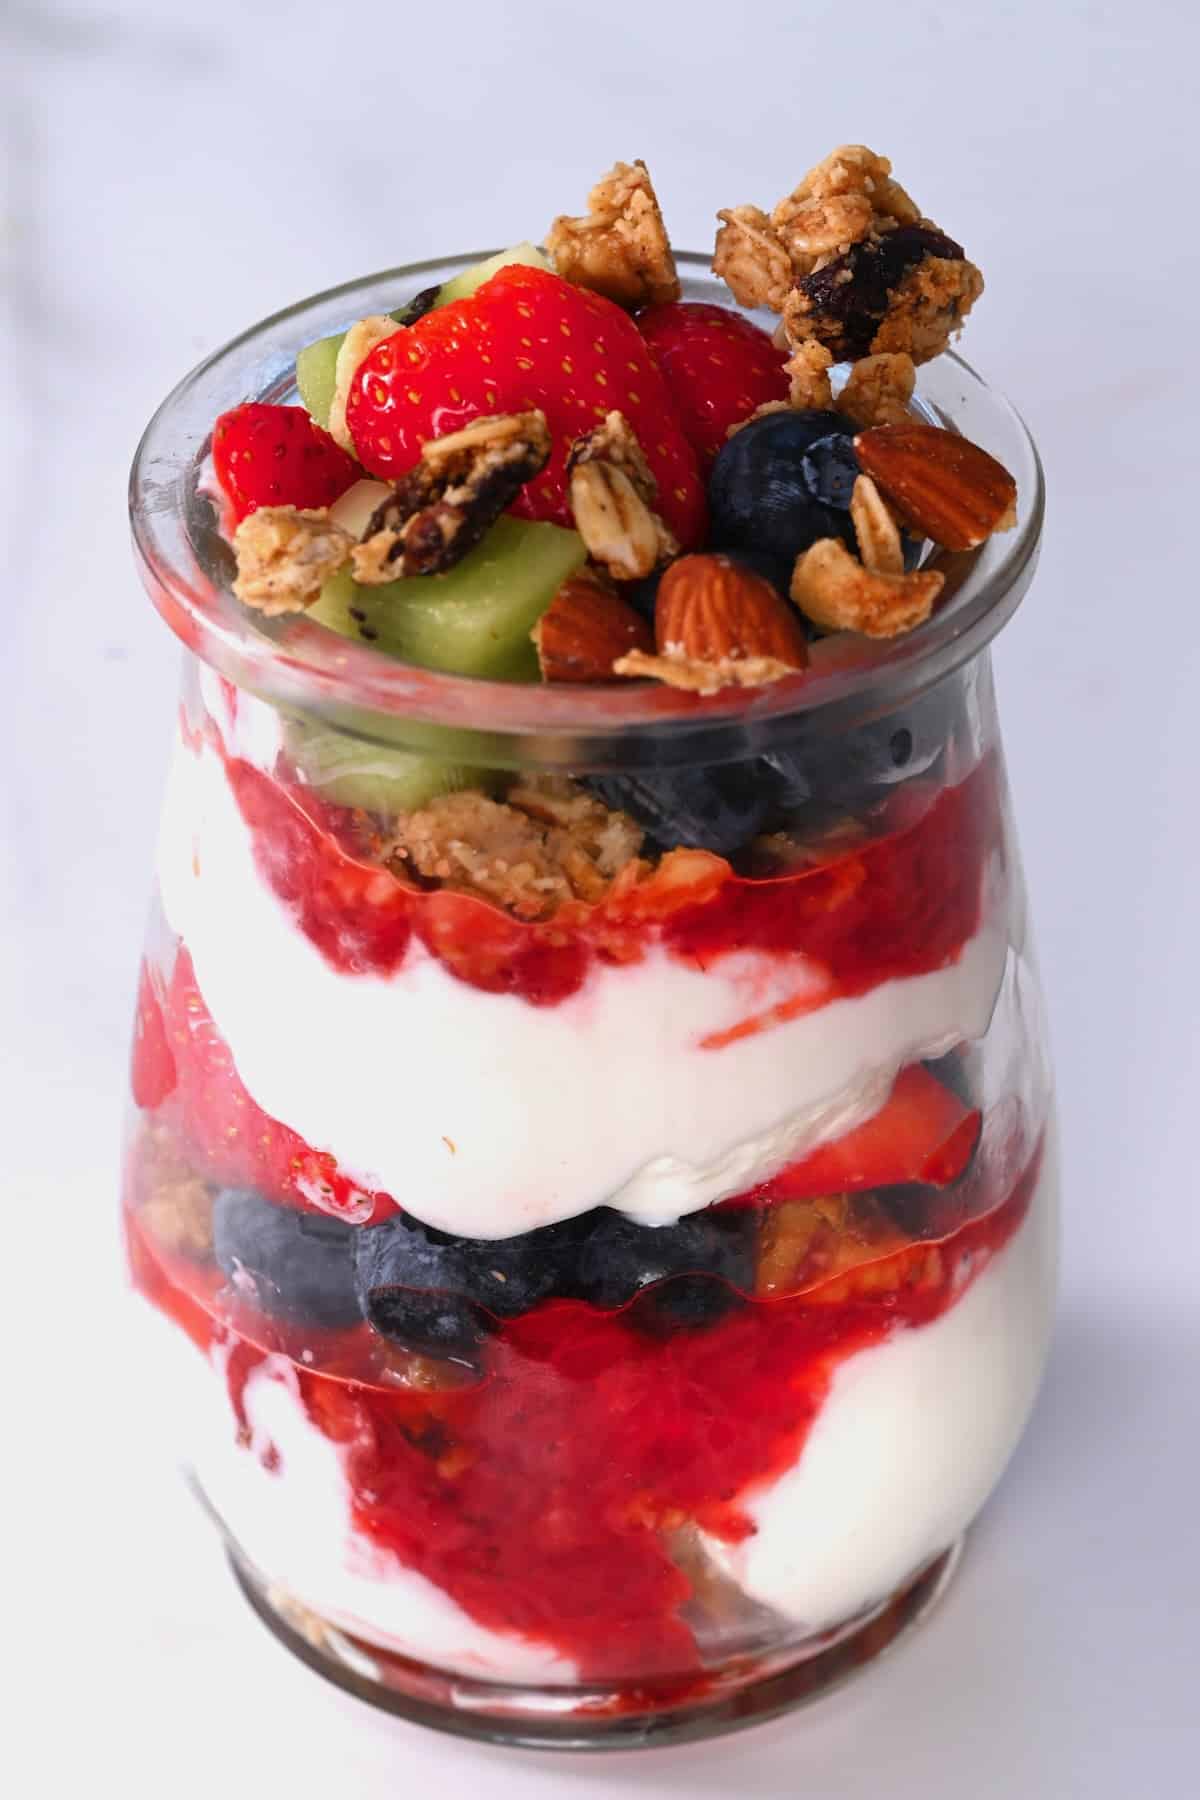 A small glass cup with yogurt parfait